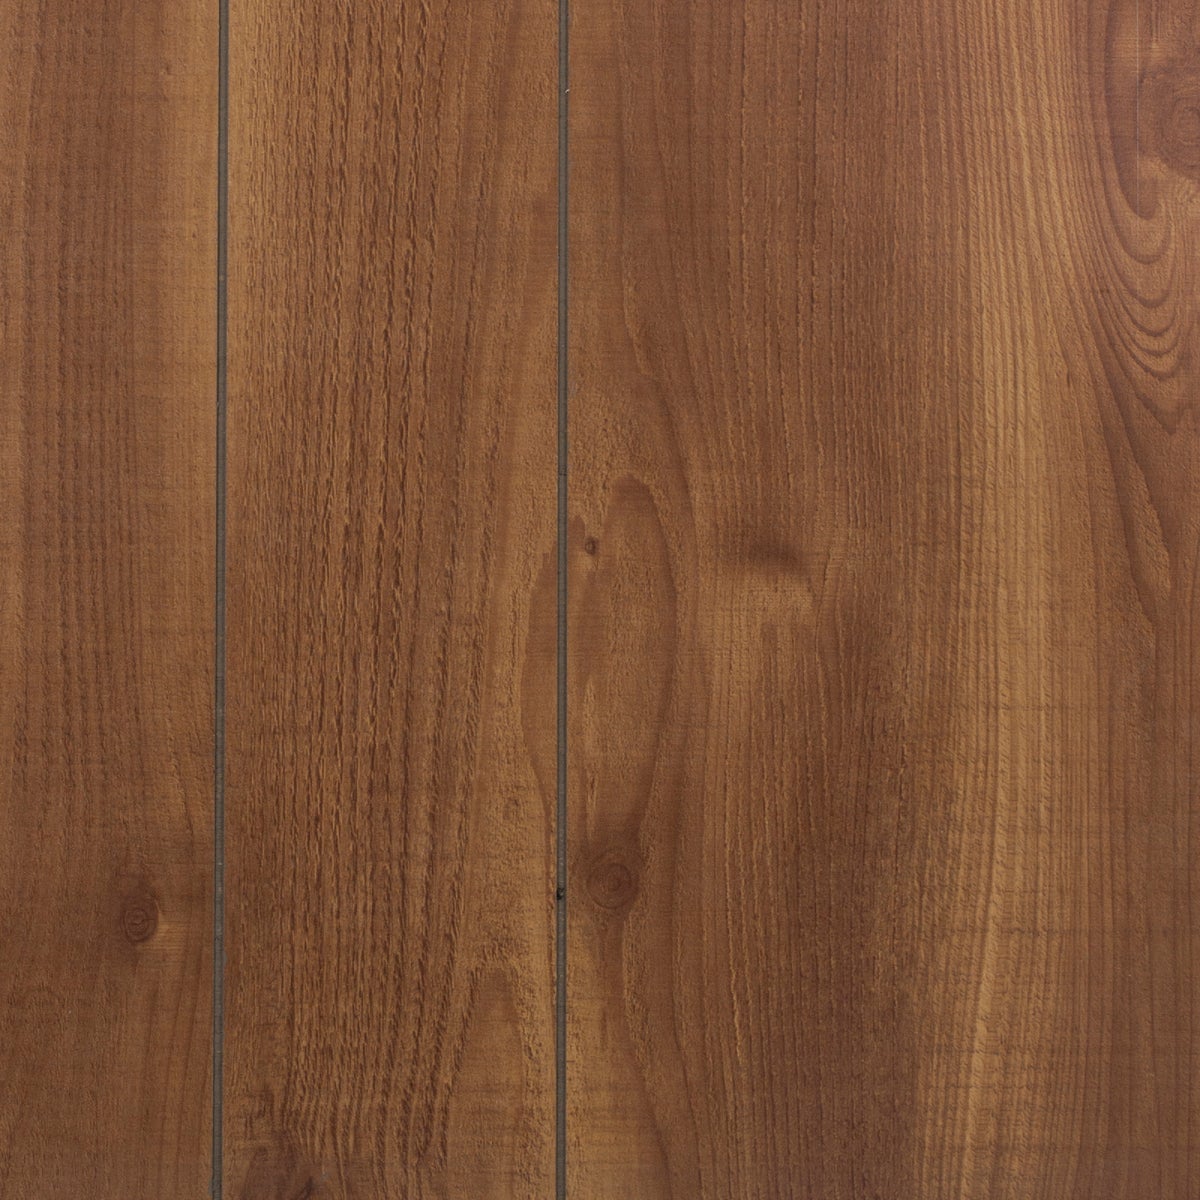 Global Product Sourcing 4 Ft. x 8 Ft. x 1/8 In. Cafe Cedar Random Groove Profile Wall Paneling